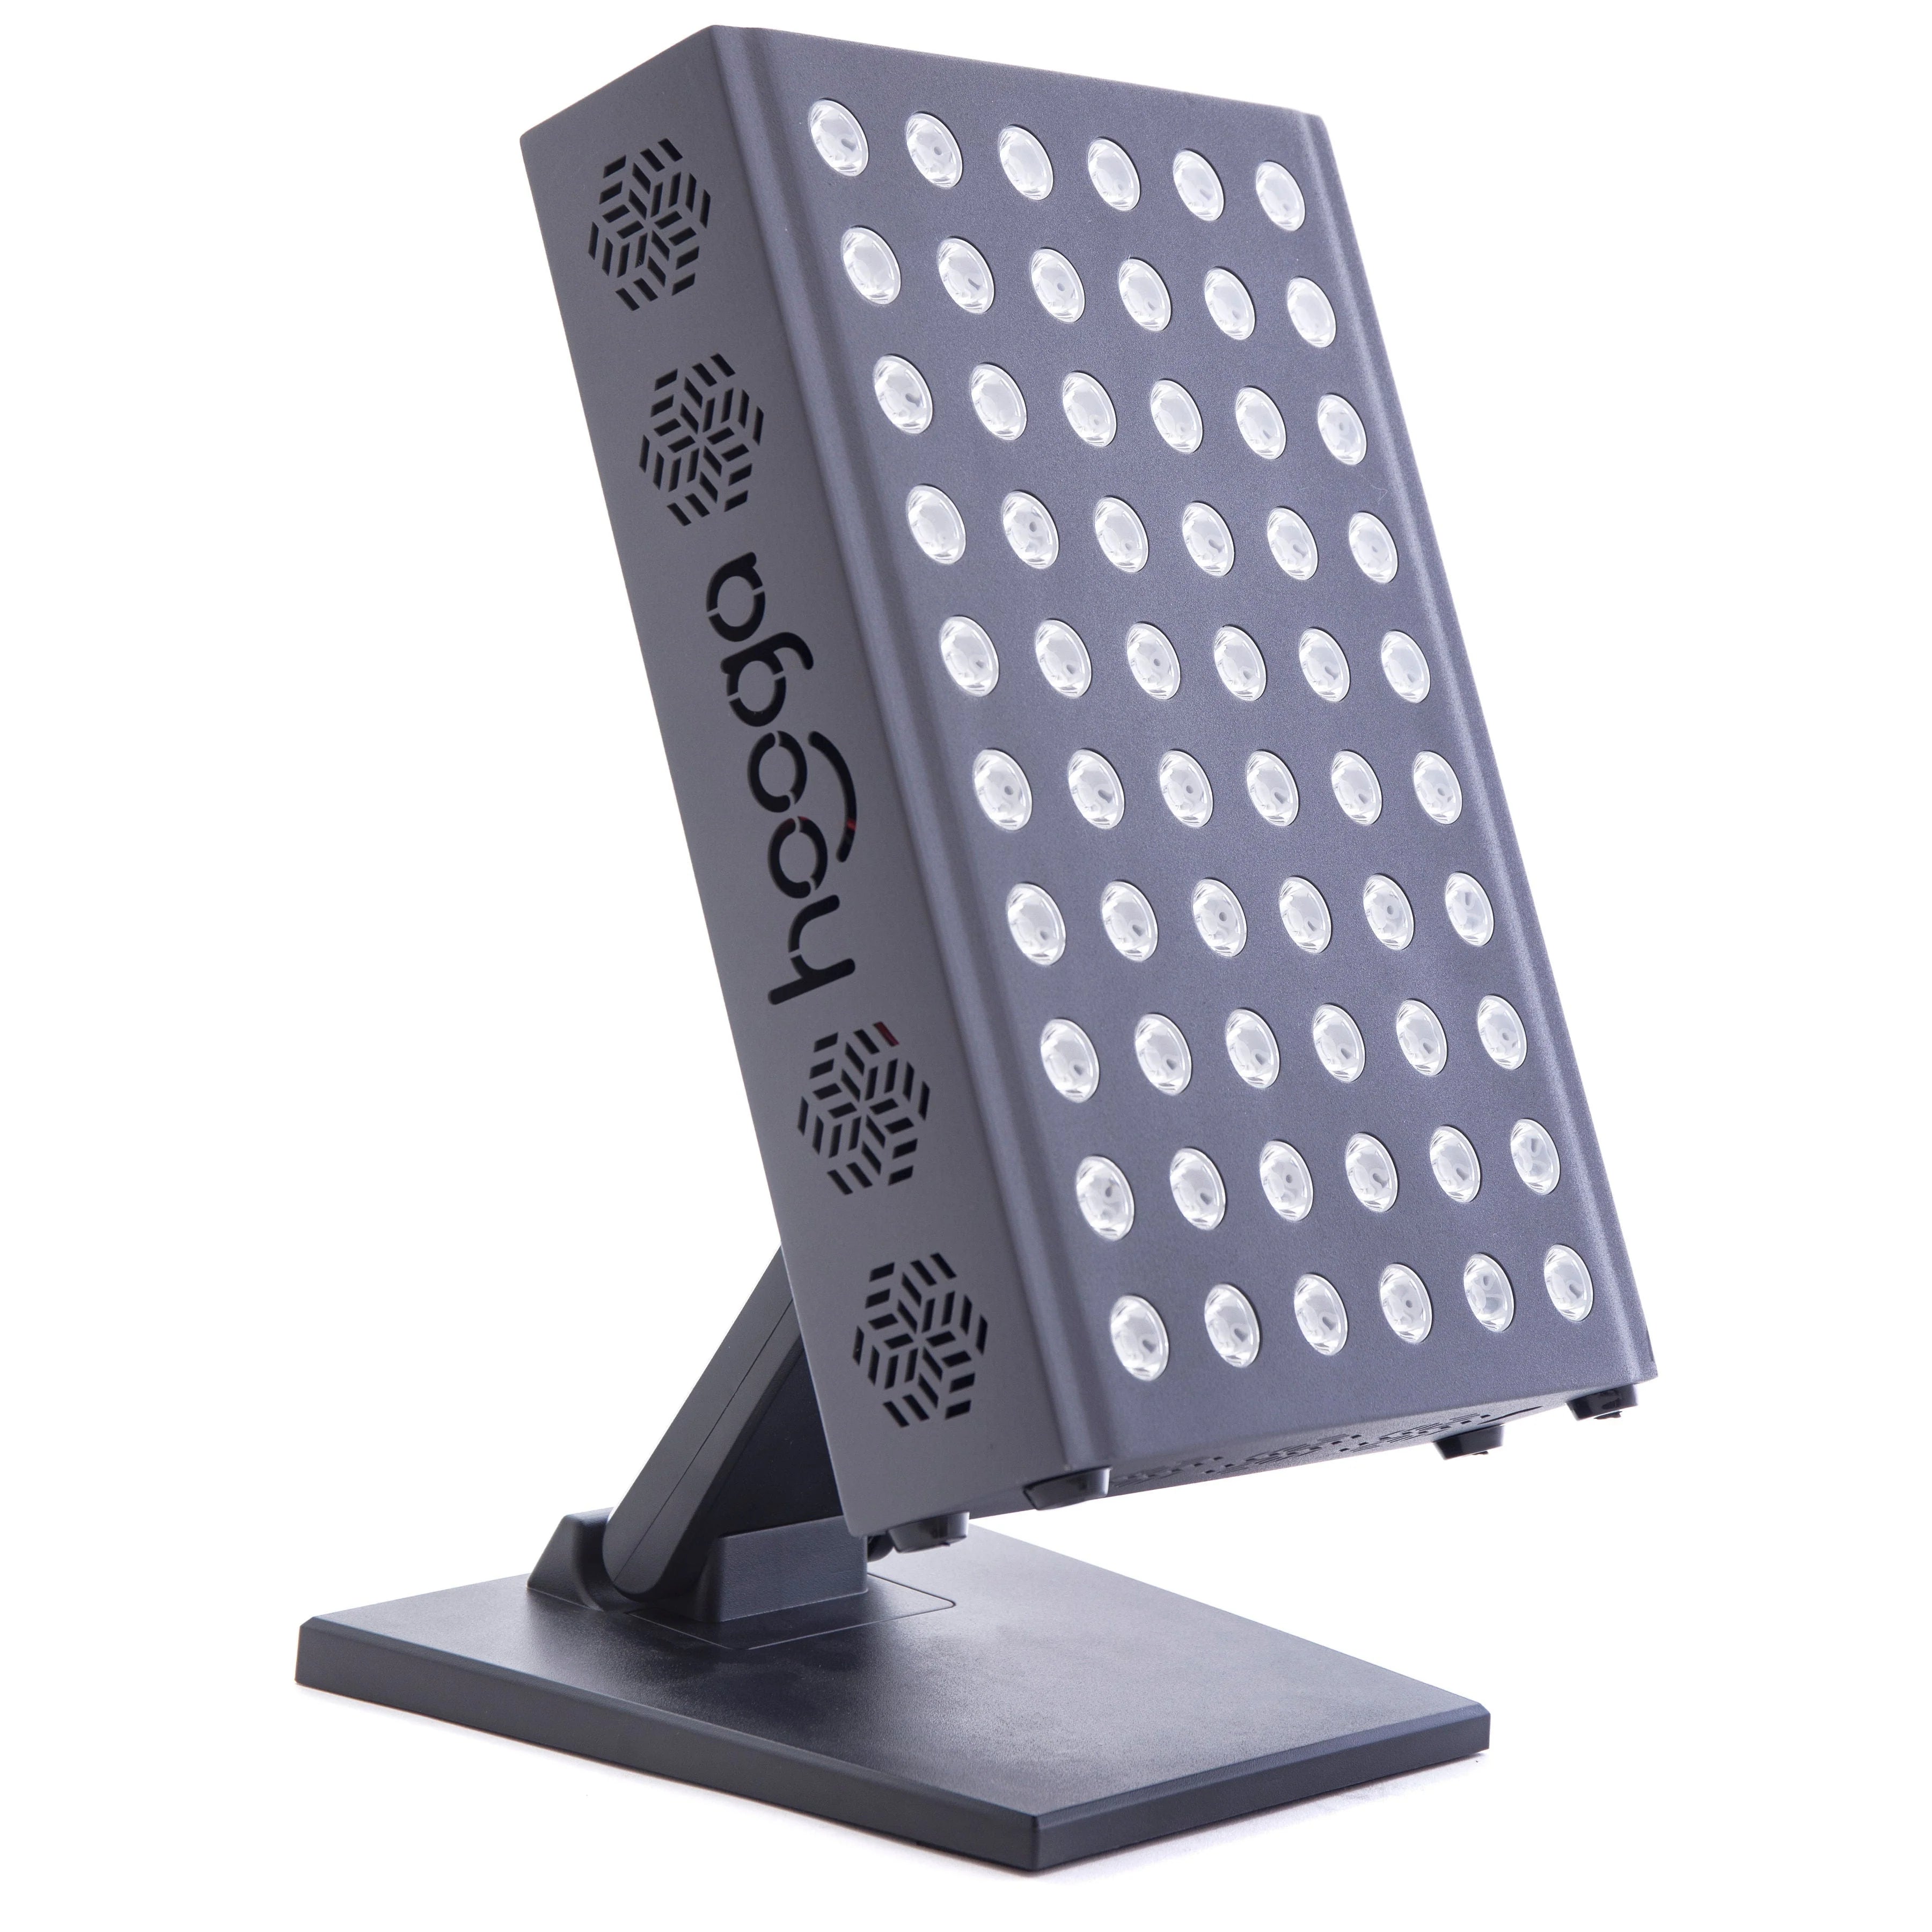 Hooga Pro 300 - Red Light Therapy Panel